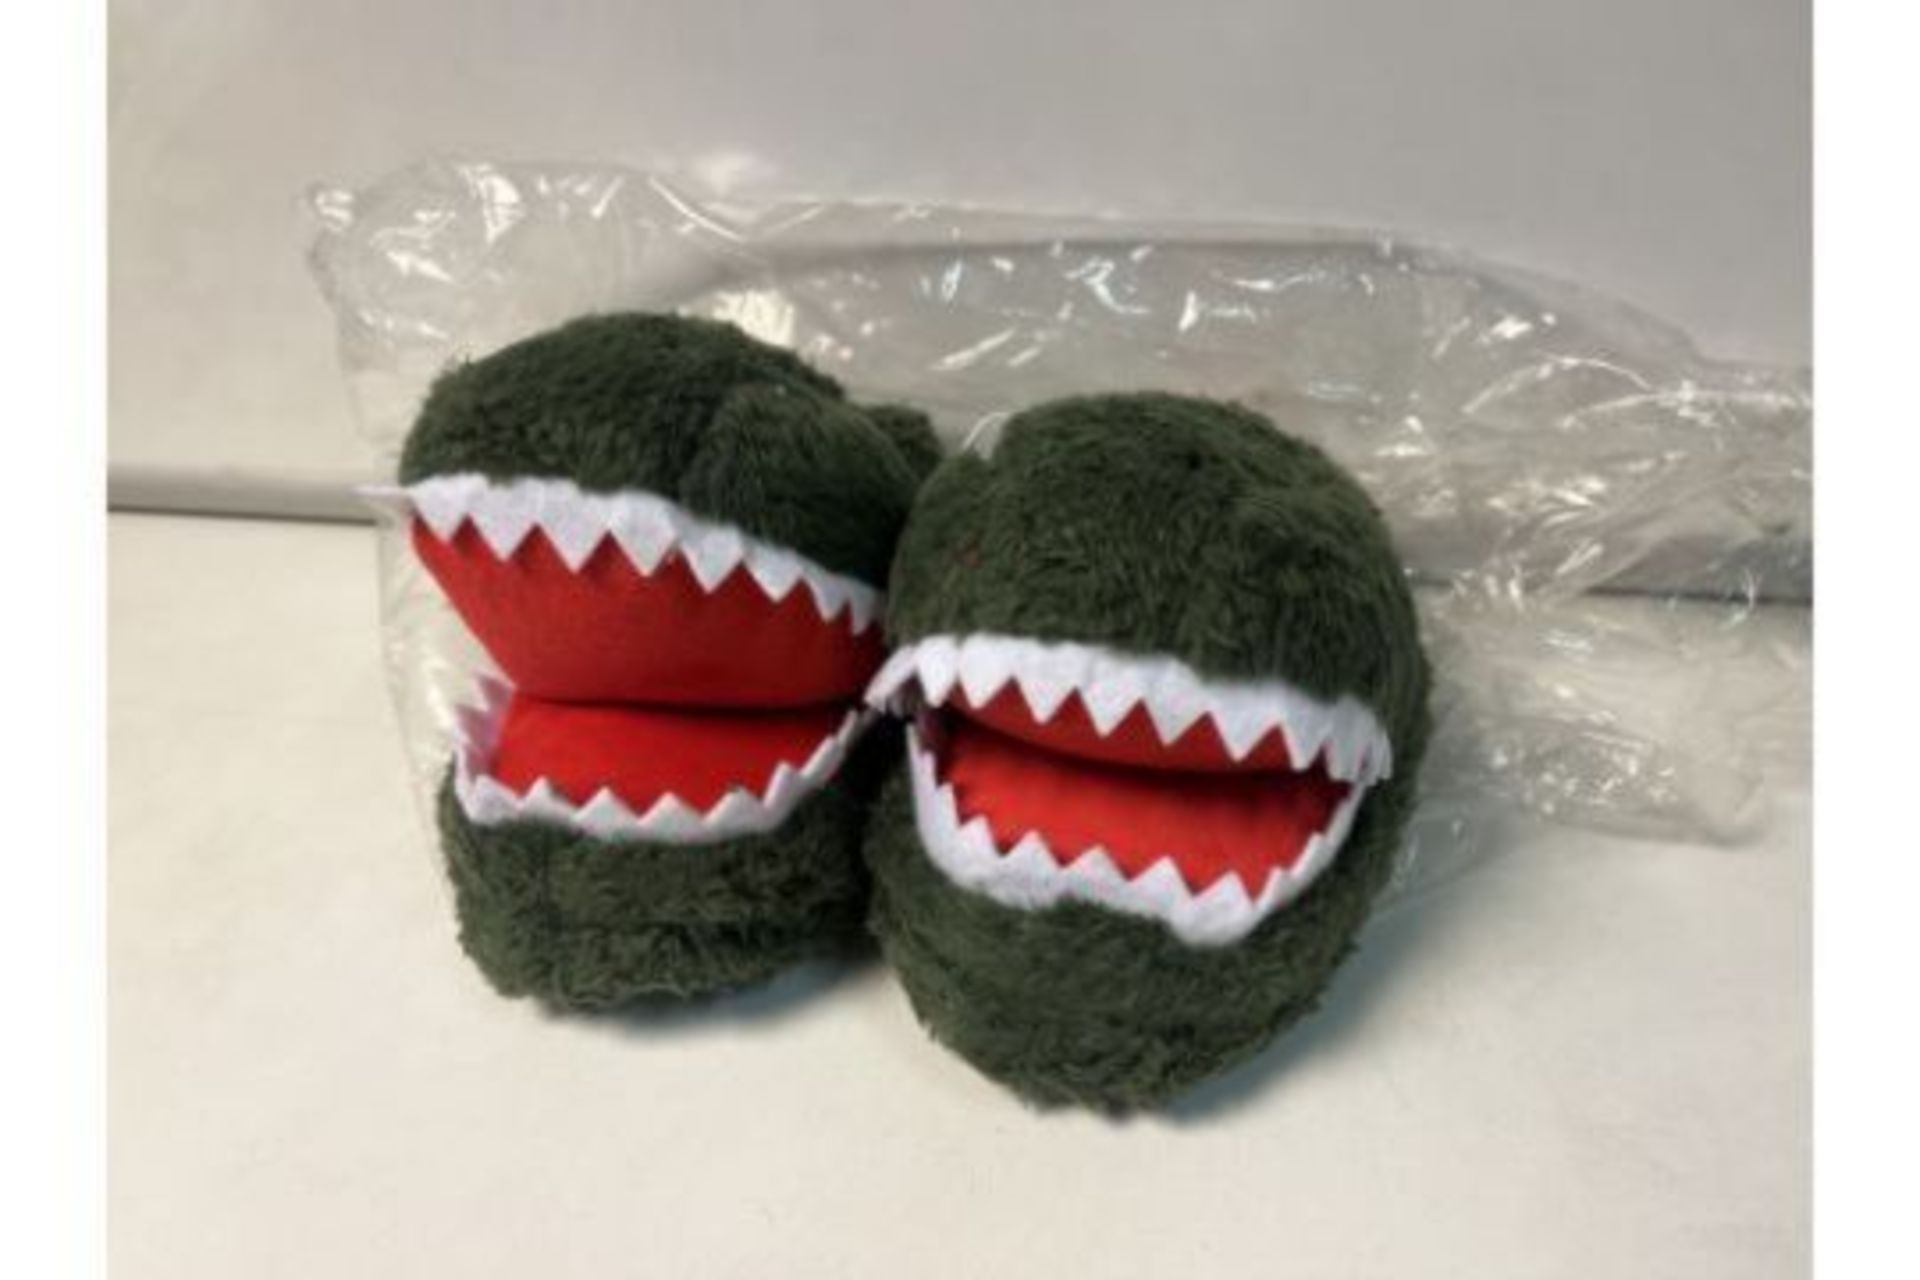 (NO VAT) 20 X BRAND NEW BAGGED PAIRS OF DINOSAUR SLIPPERS (SIZES MAY VARY) R9